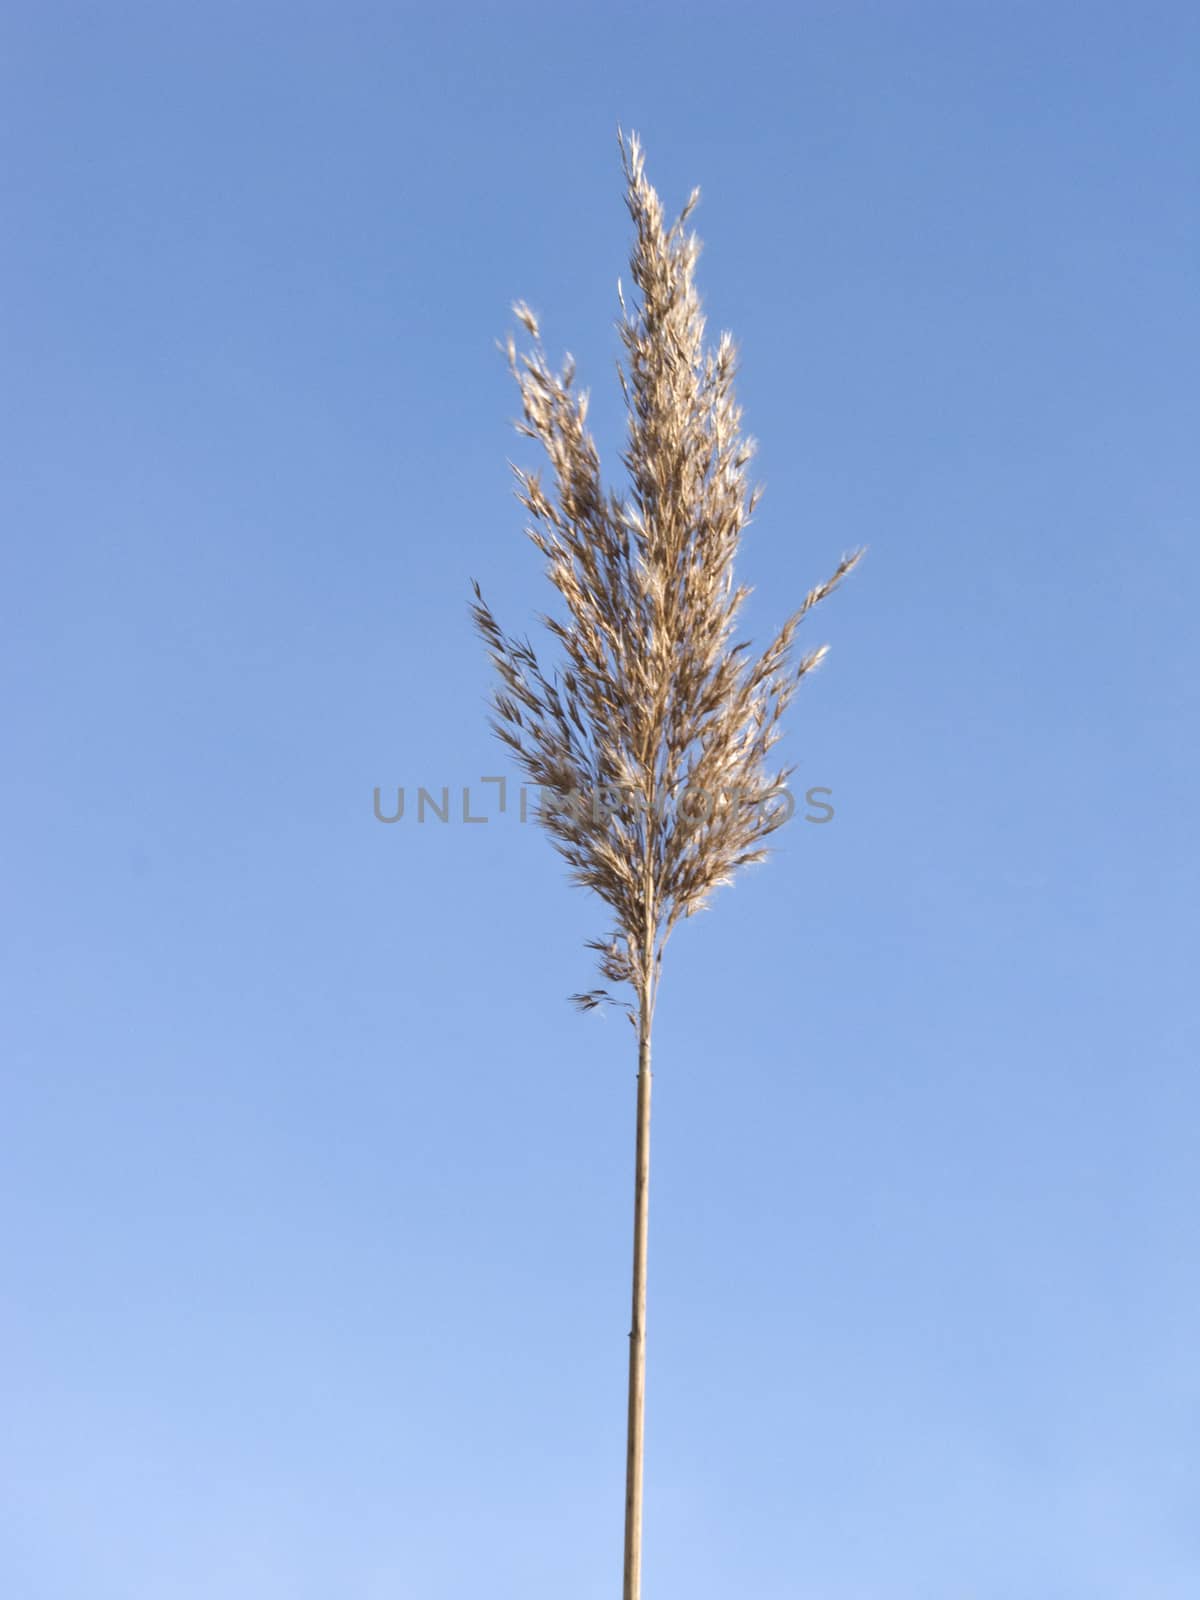 Dry panicle of a single reed on sky background